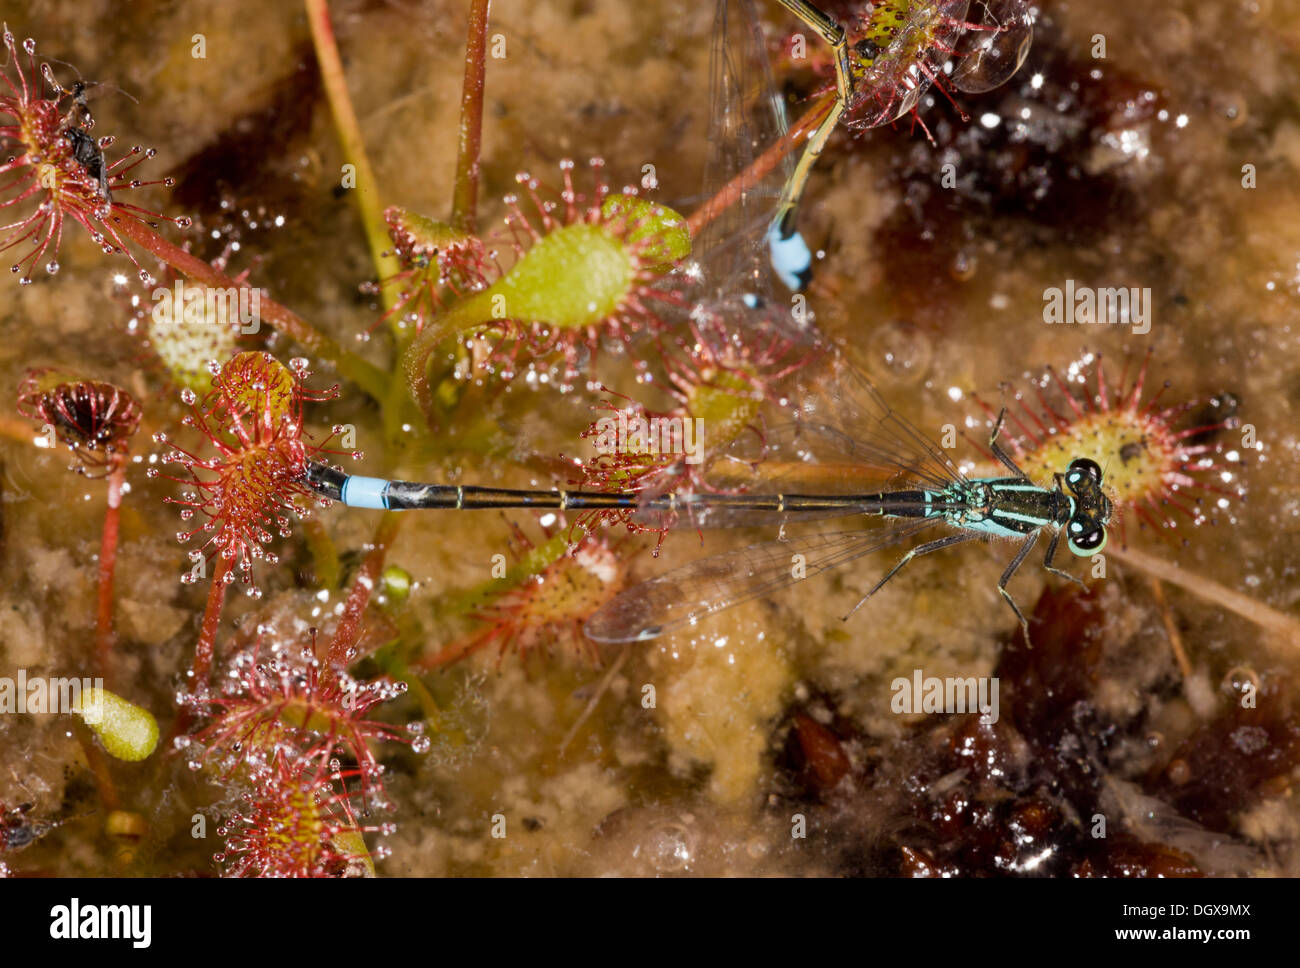 Common Bluetail / Blue-tailed damselfly, Ischnura elegans, caught on sundew leaves in a Dorset bog. Stock Photo